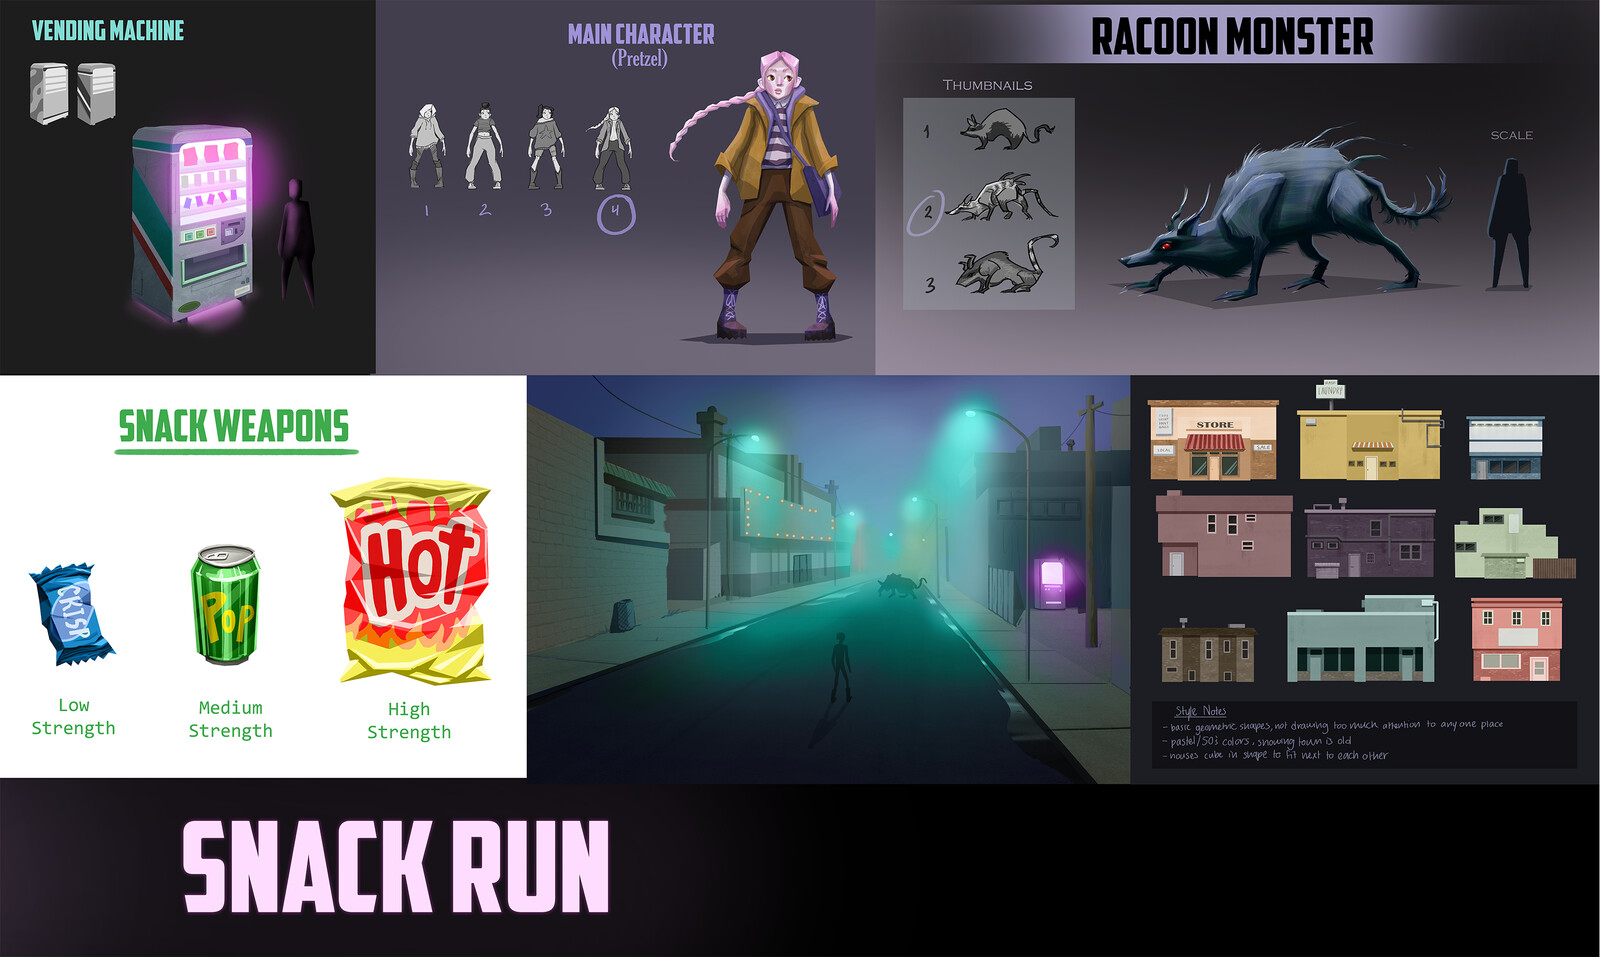 "Snack Run" game concepts